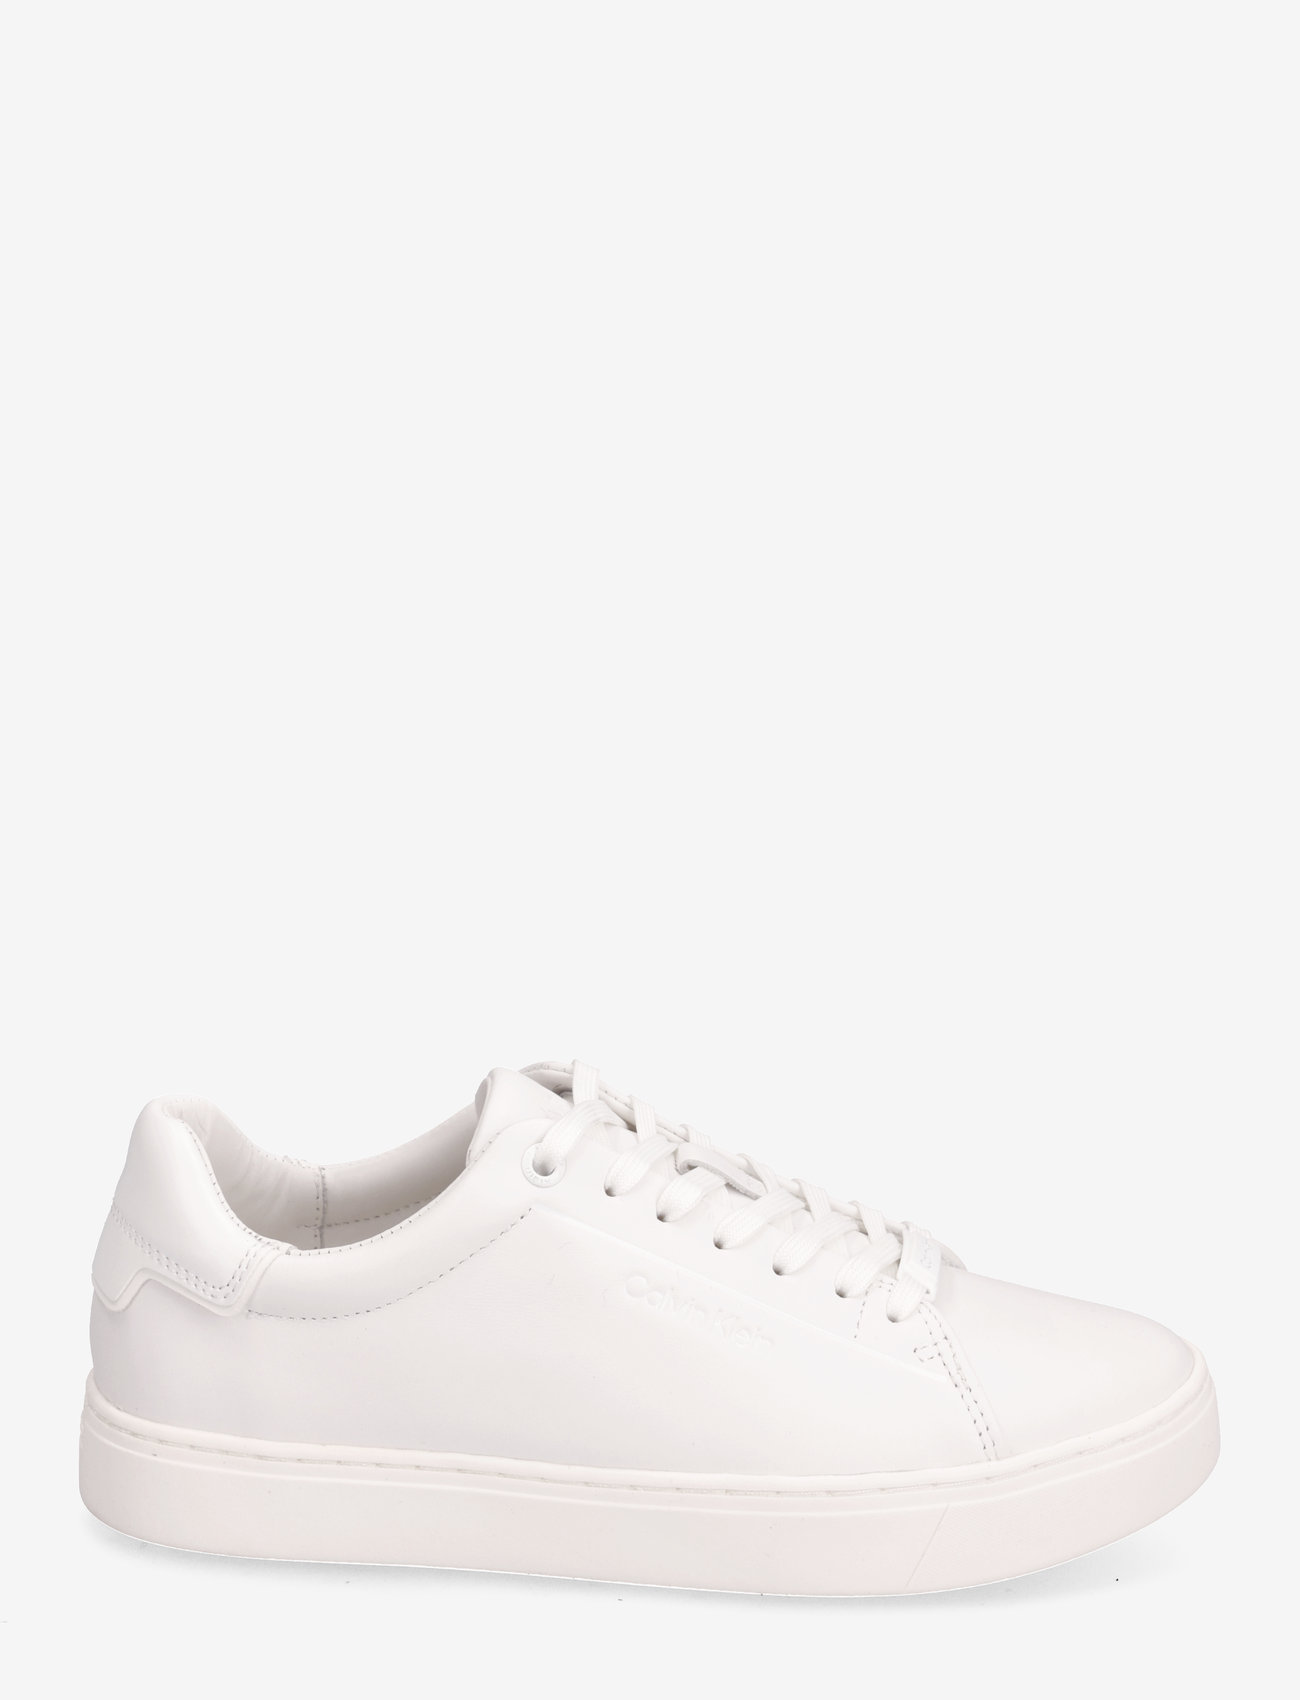 Calvin Klein - CLEAN CUPSOLE LACE UP - lage sneakers - triple white - 1